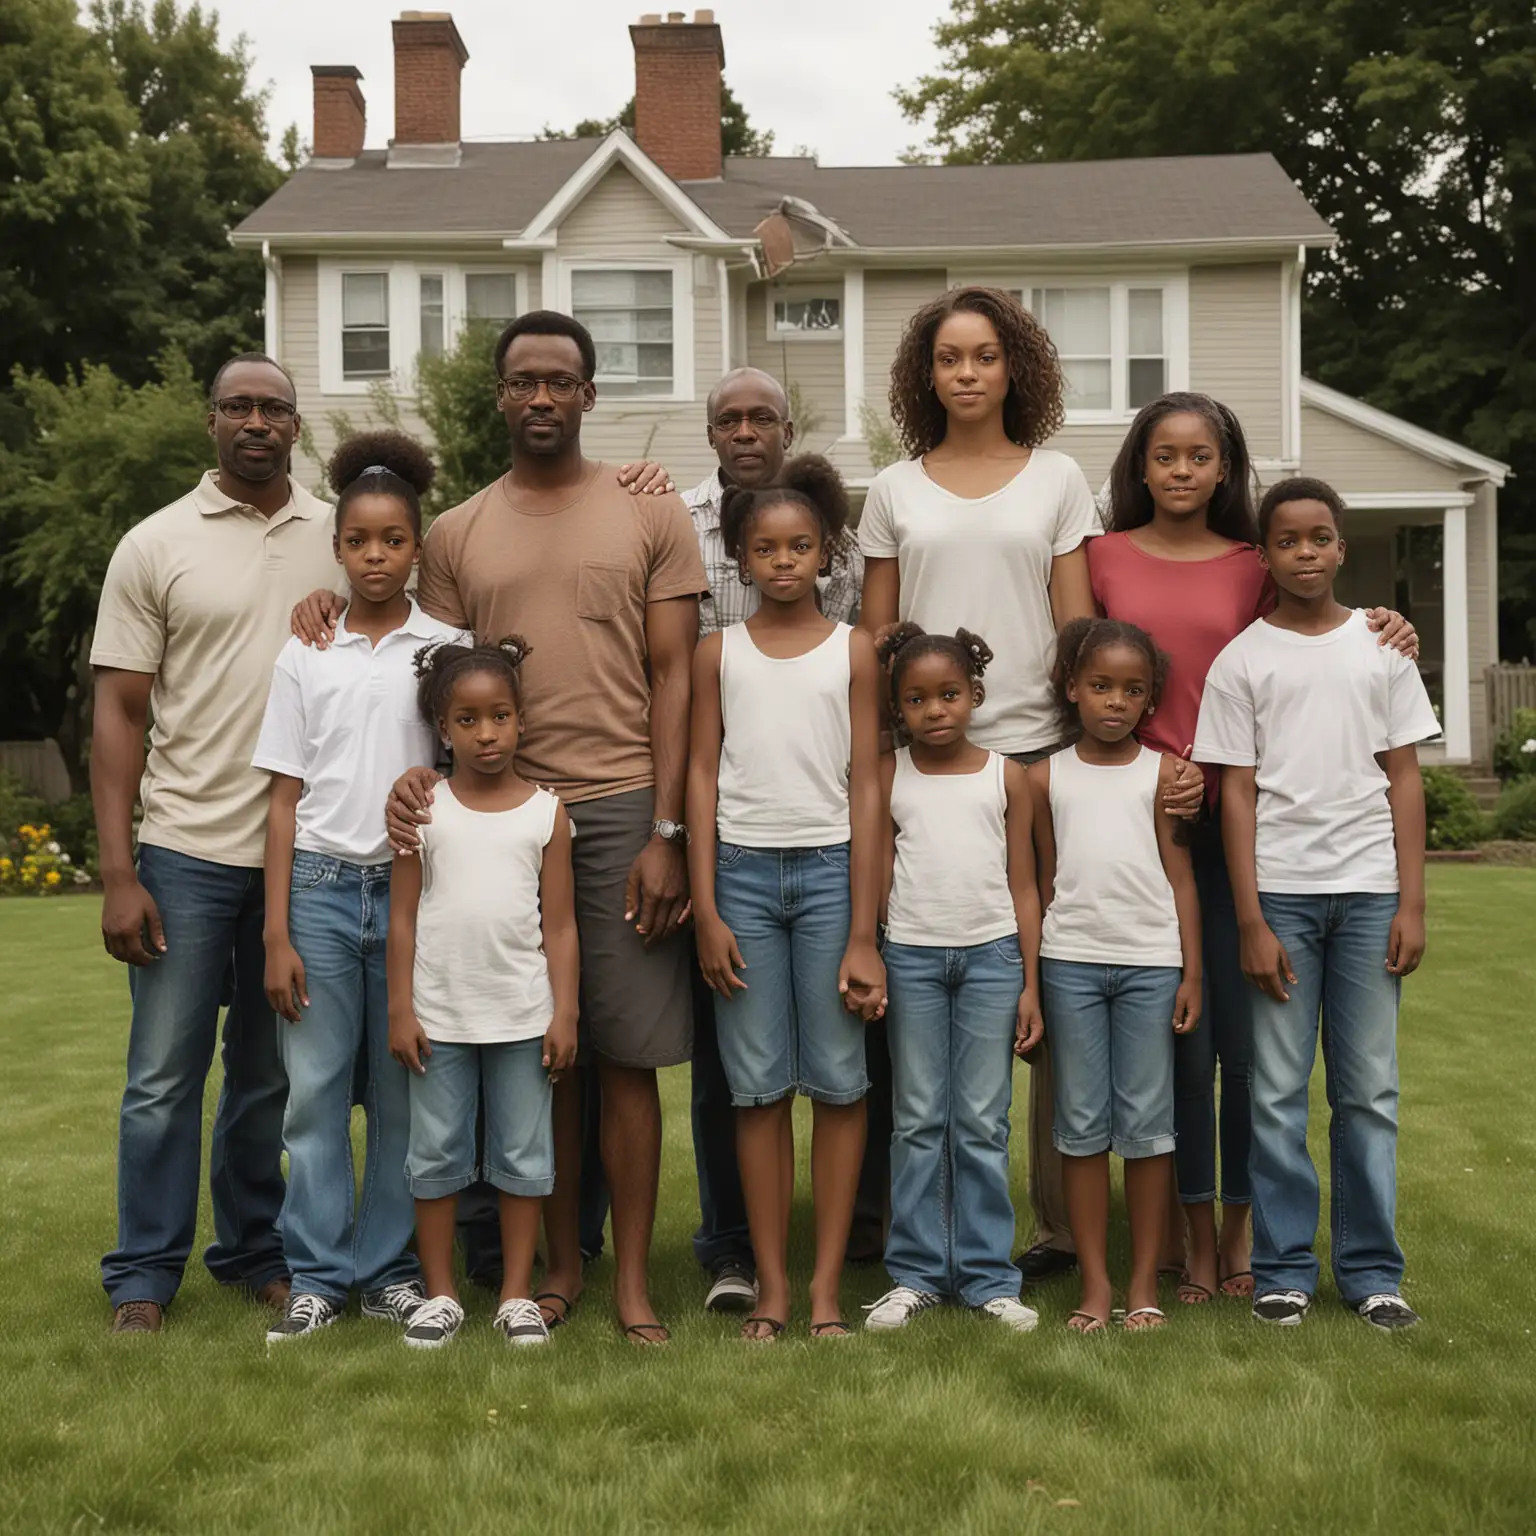 Samples-Family-Unity-Resilient-Black-Parents-and-Children-Stand-Proudly-By-Their-Home